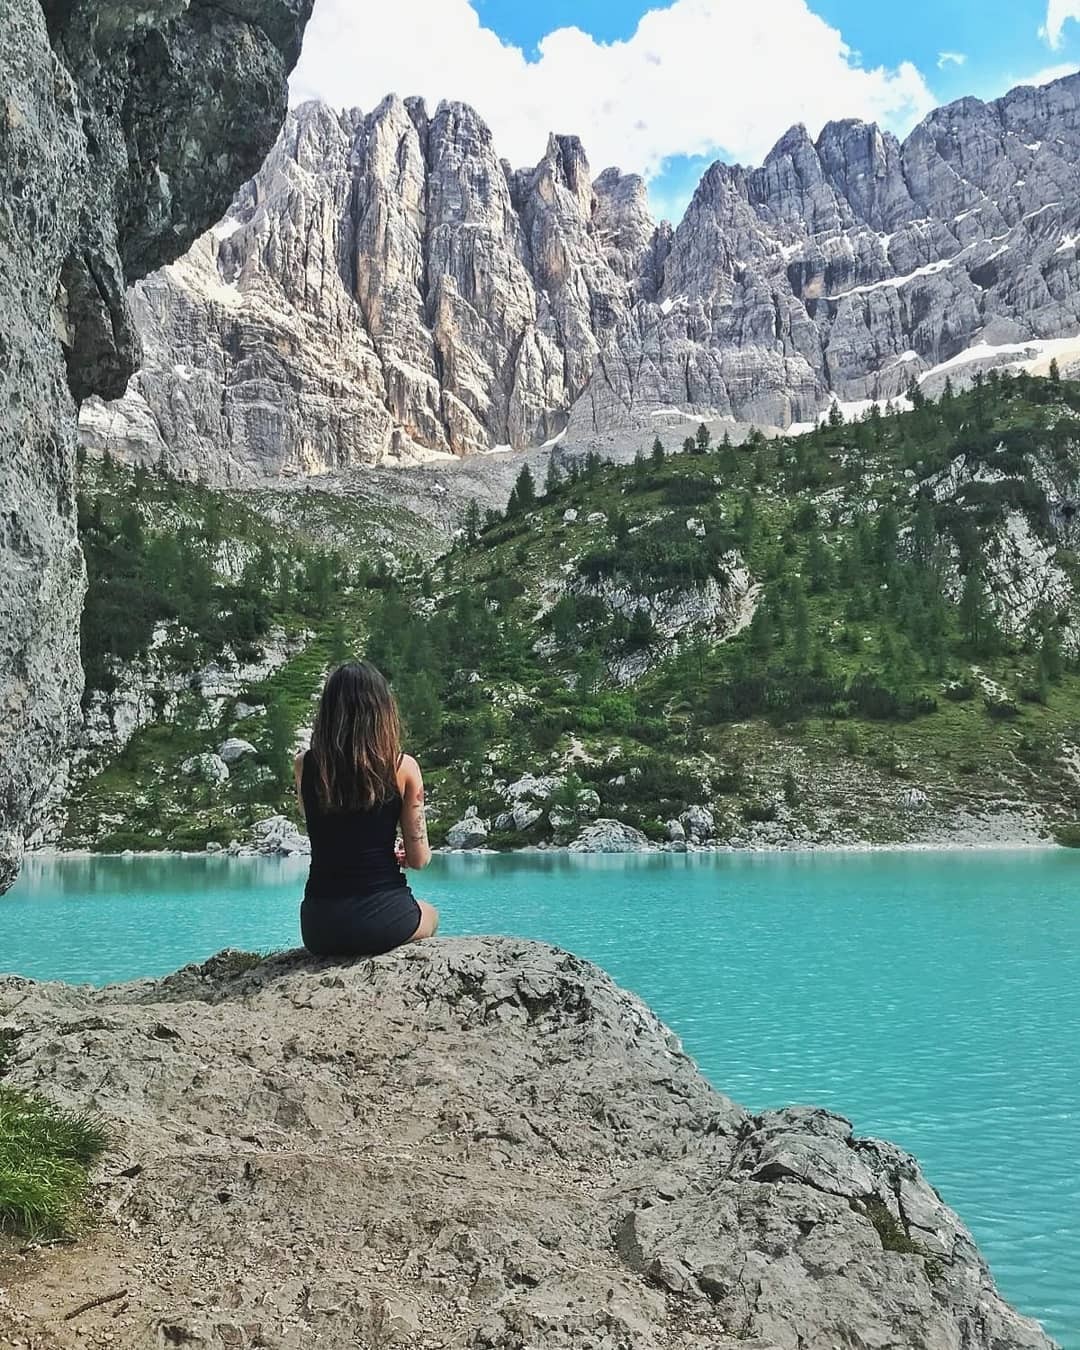 Lago di Sorapis is a haven for hikers, offering trails suitable for various skill levels. The most popular route is the trail that starts at Passo Tre Croci. As you ascend